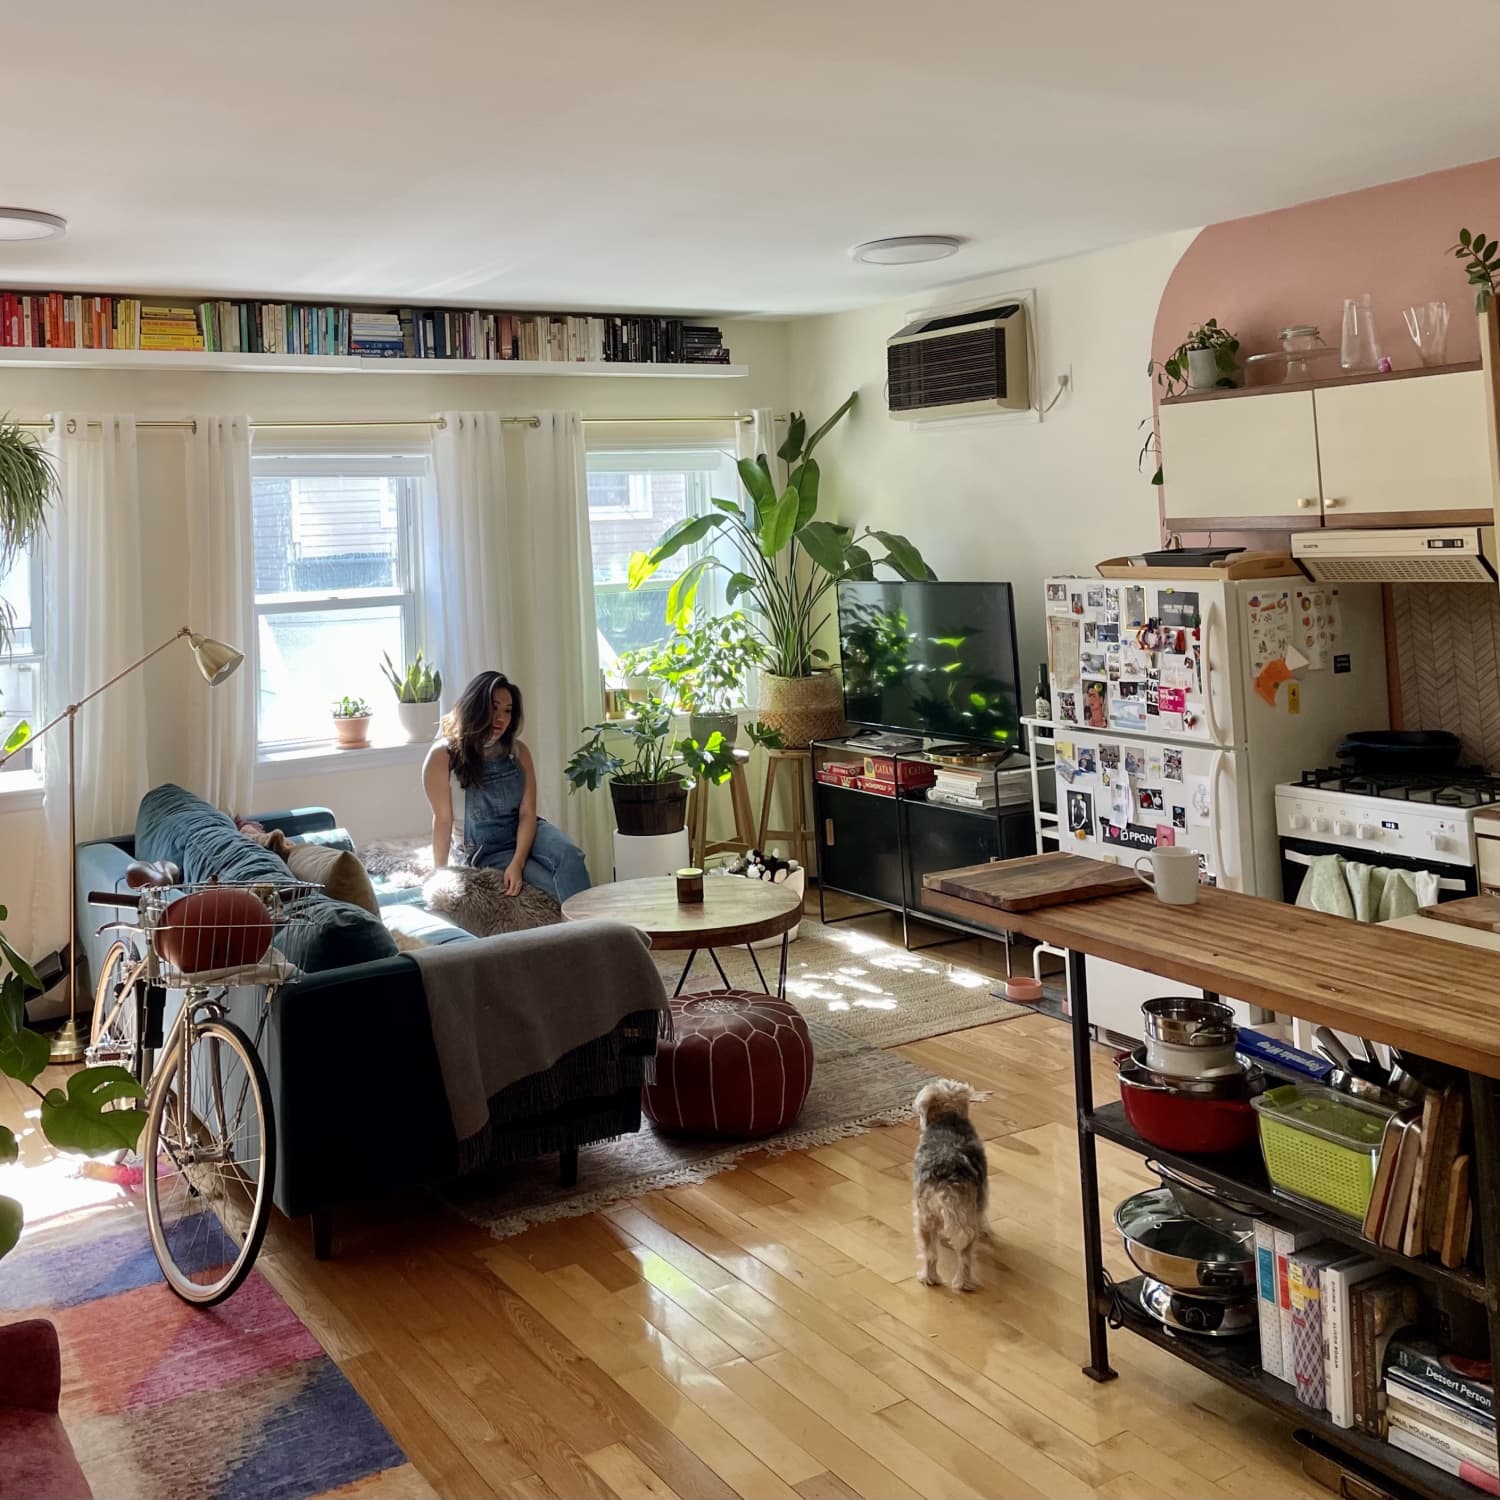 9 Lessons You'll Learn Living in a Studio Apartment | Apartment Therapy